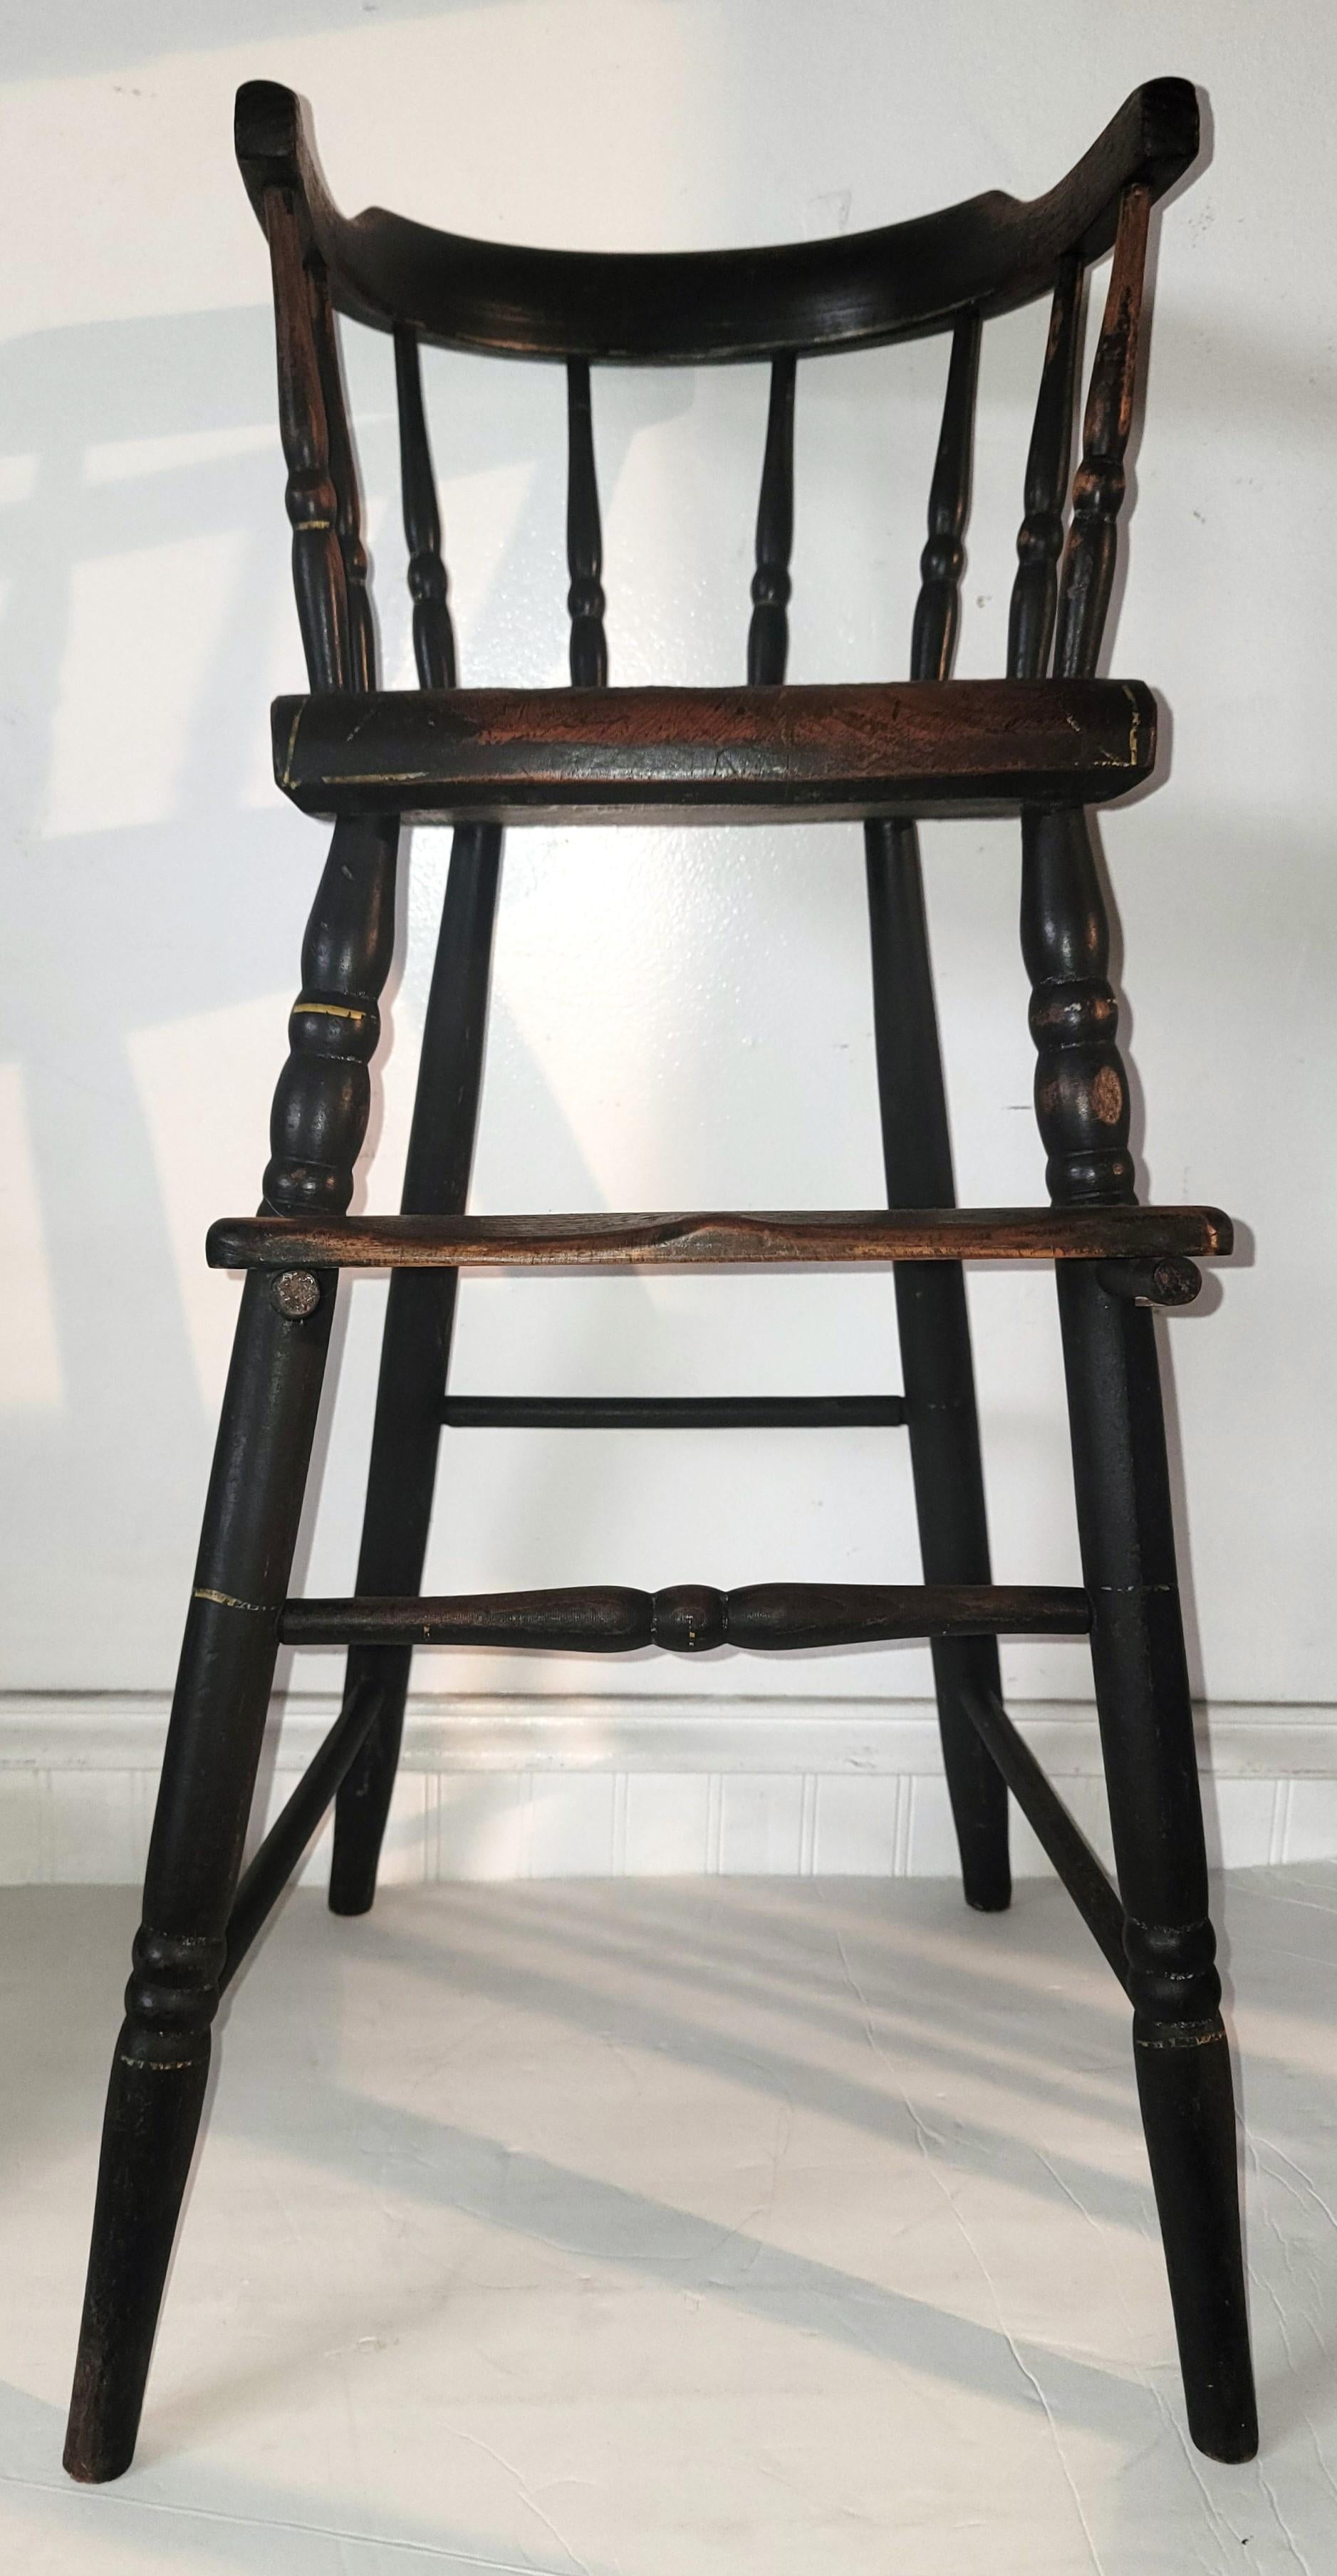 Early 19Thc Original Painted  Child's  Height Chair From New England - Circa 1840s
Wonderful wooden child's chair in amazing condition. This chair is a high chair meant to be level at the dinner table. Child's seat provides height and has as step